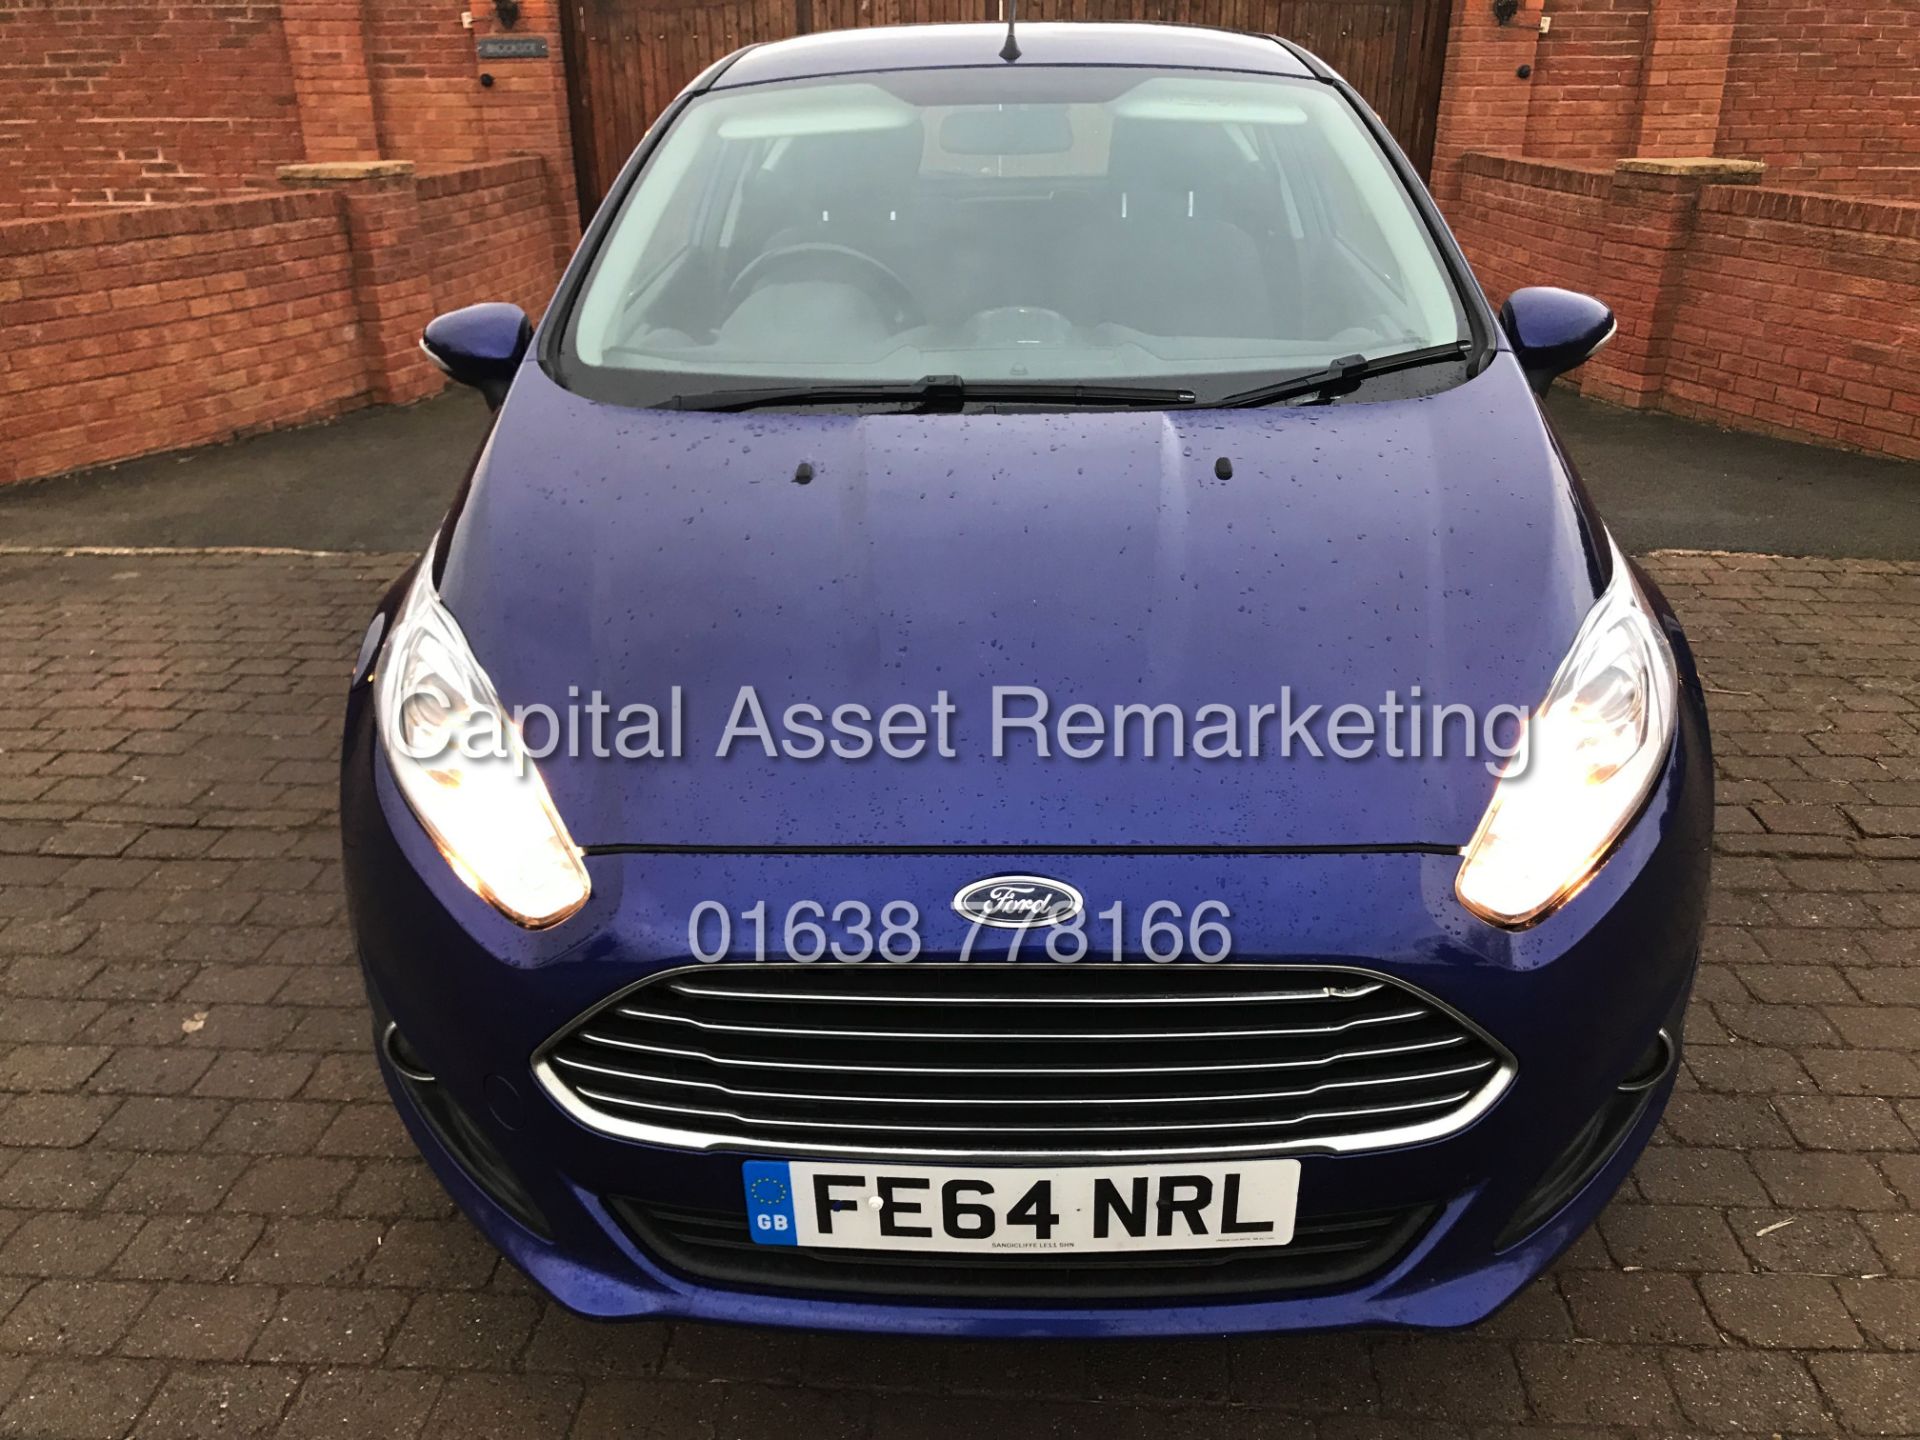 ON SALE FORD FIESTA 1.6TDCI "ZETEC ECONETIC" 1 OWNER FSH (2015 MODEL) ZERO £ ROAD TAX - AIR CON - Image 2 of 27